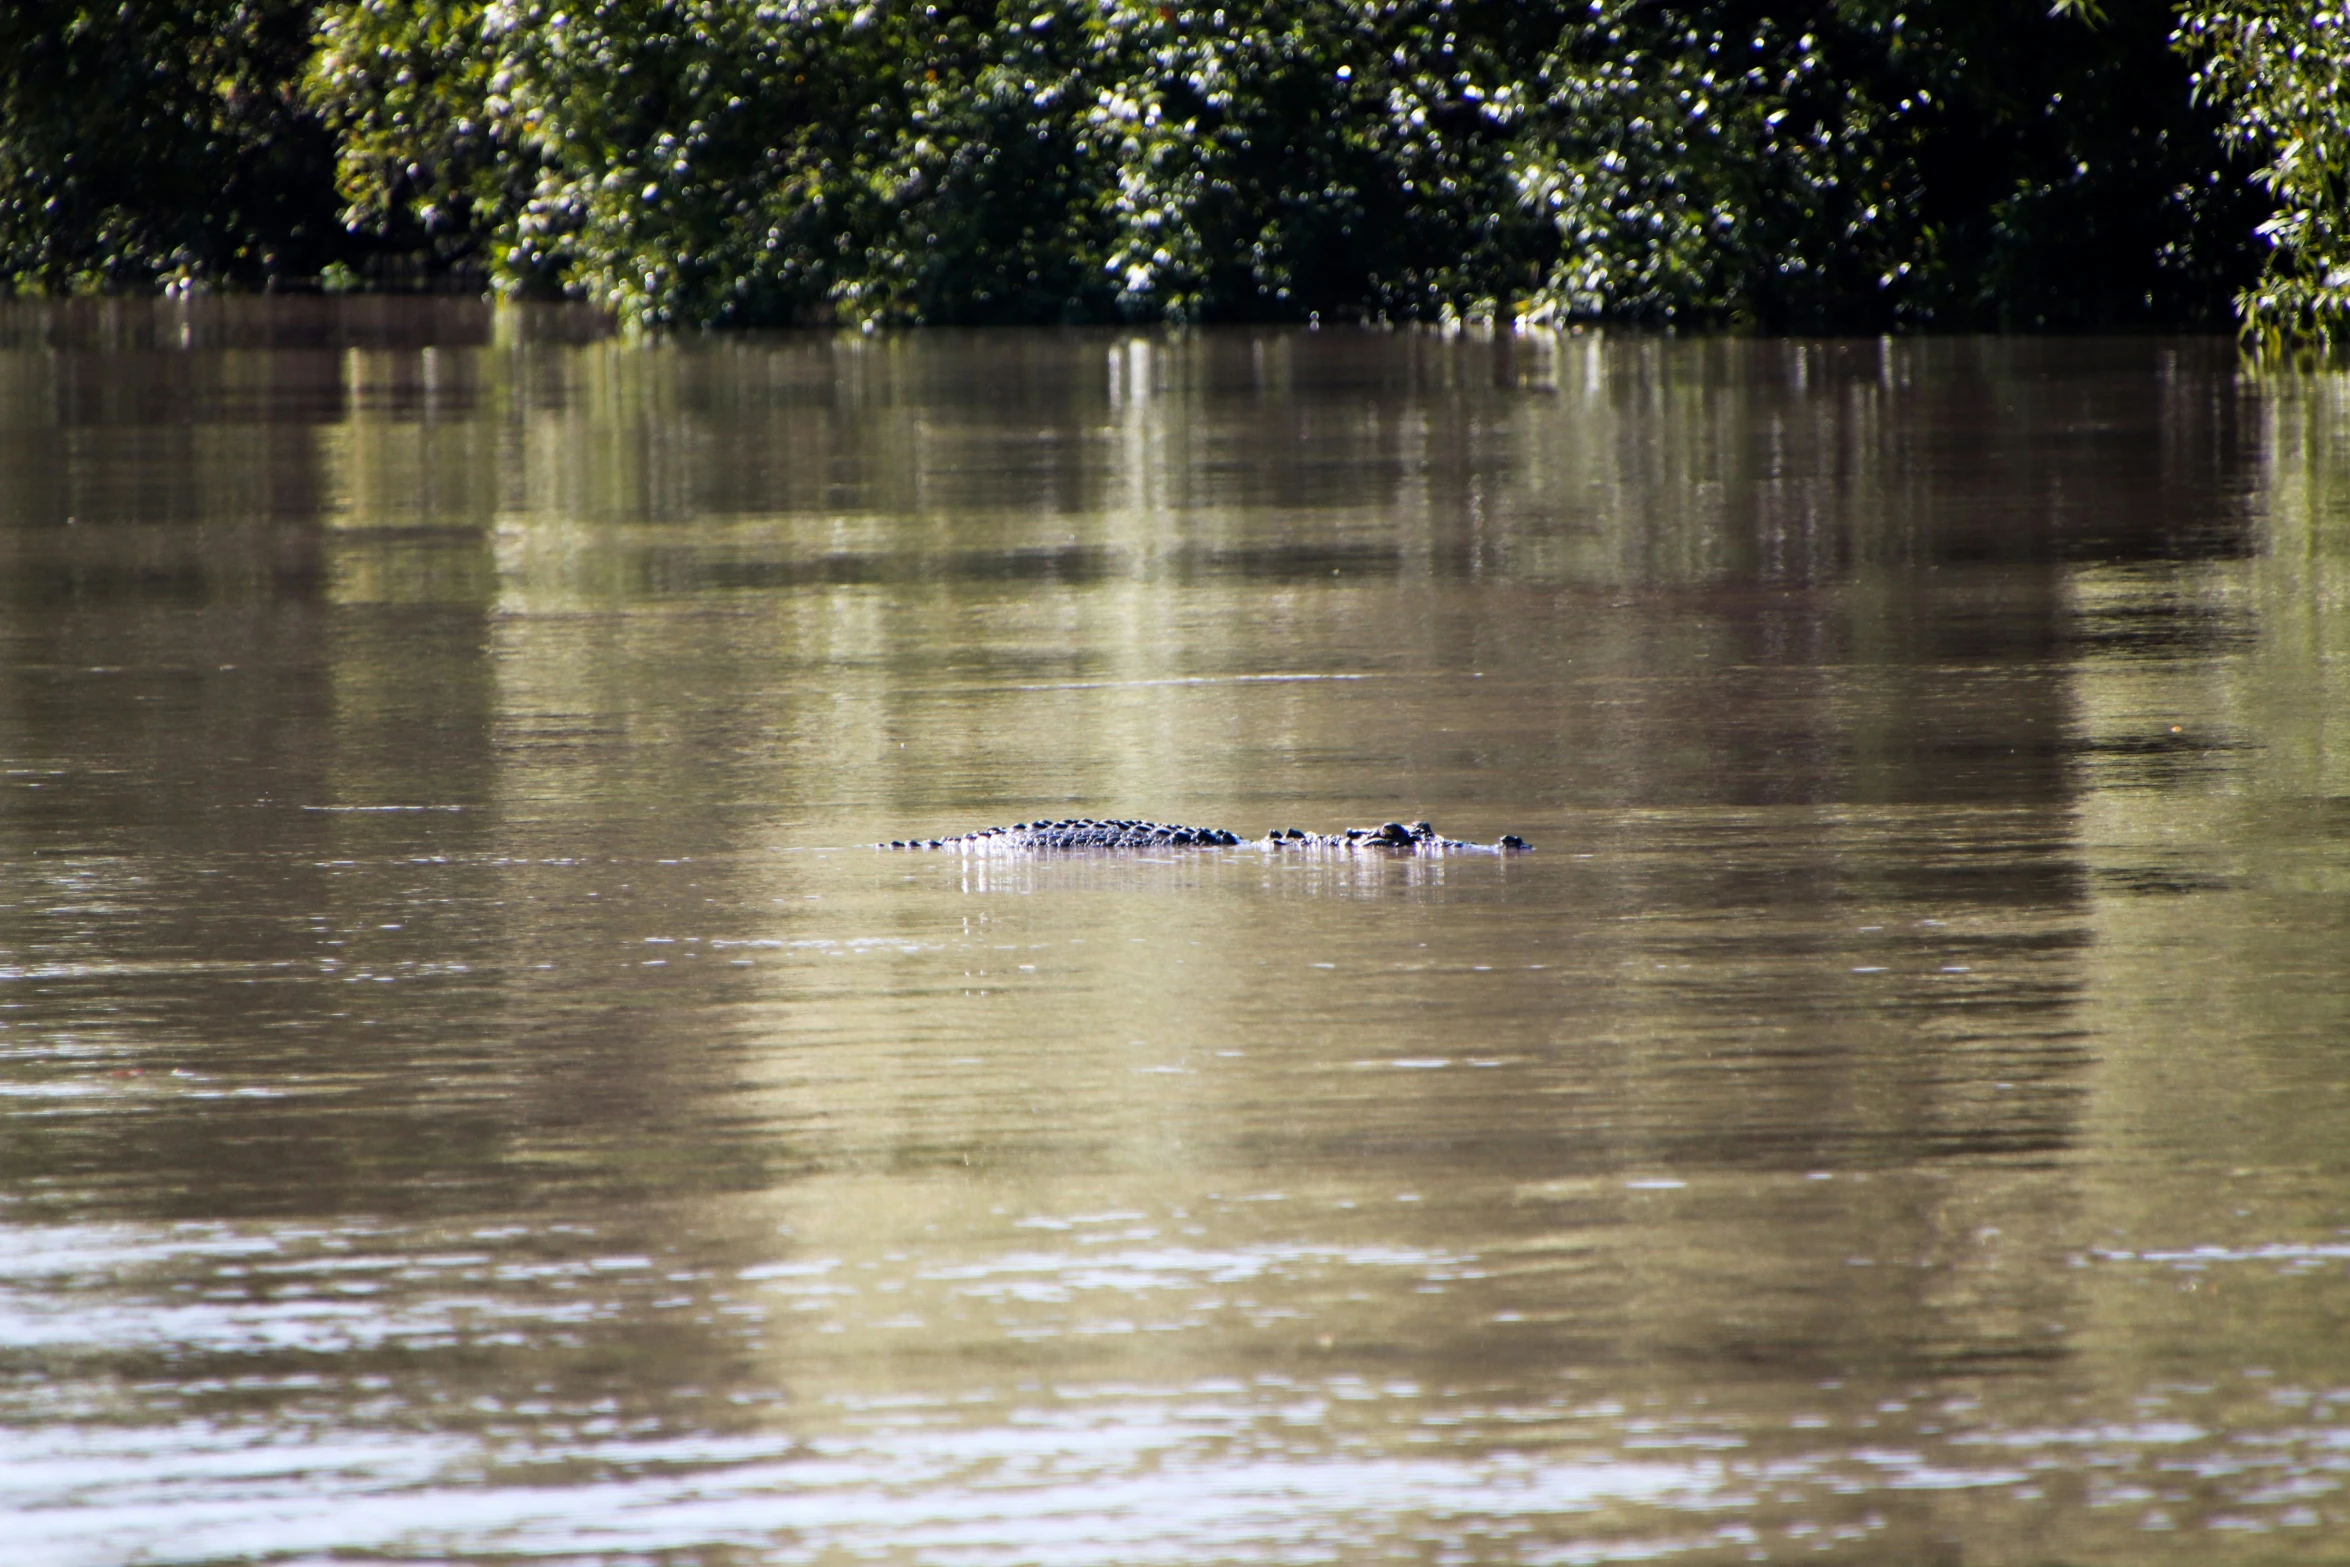 a single crocodile in some brown water near trees